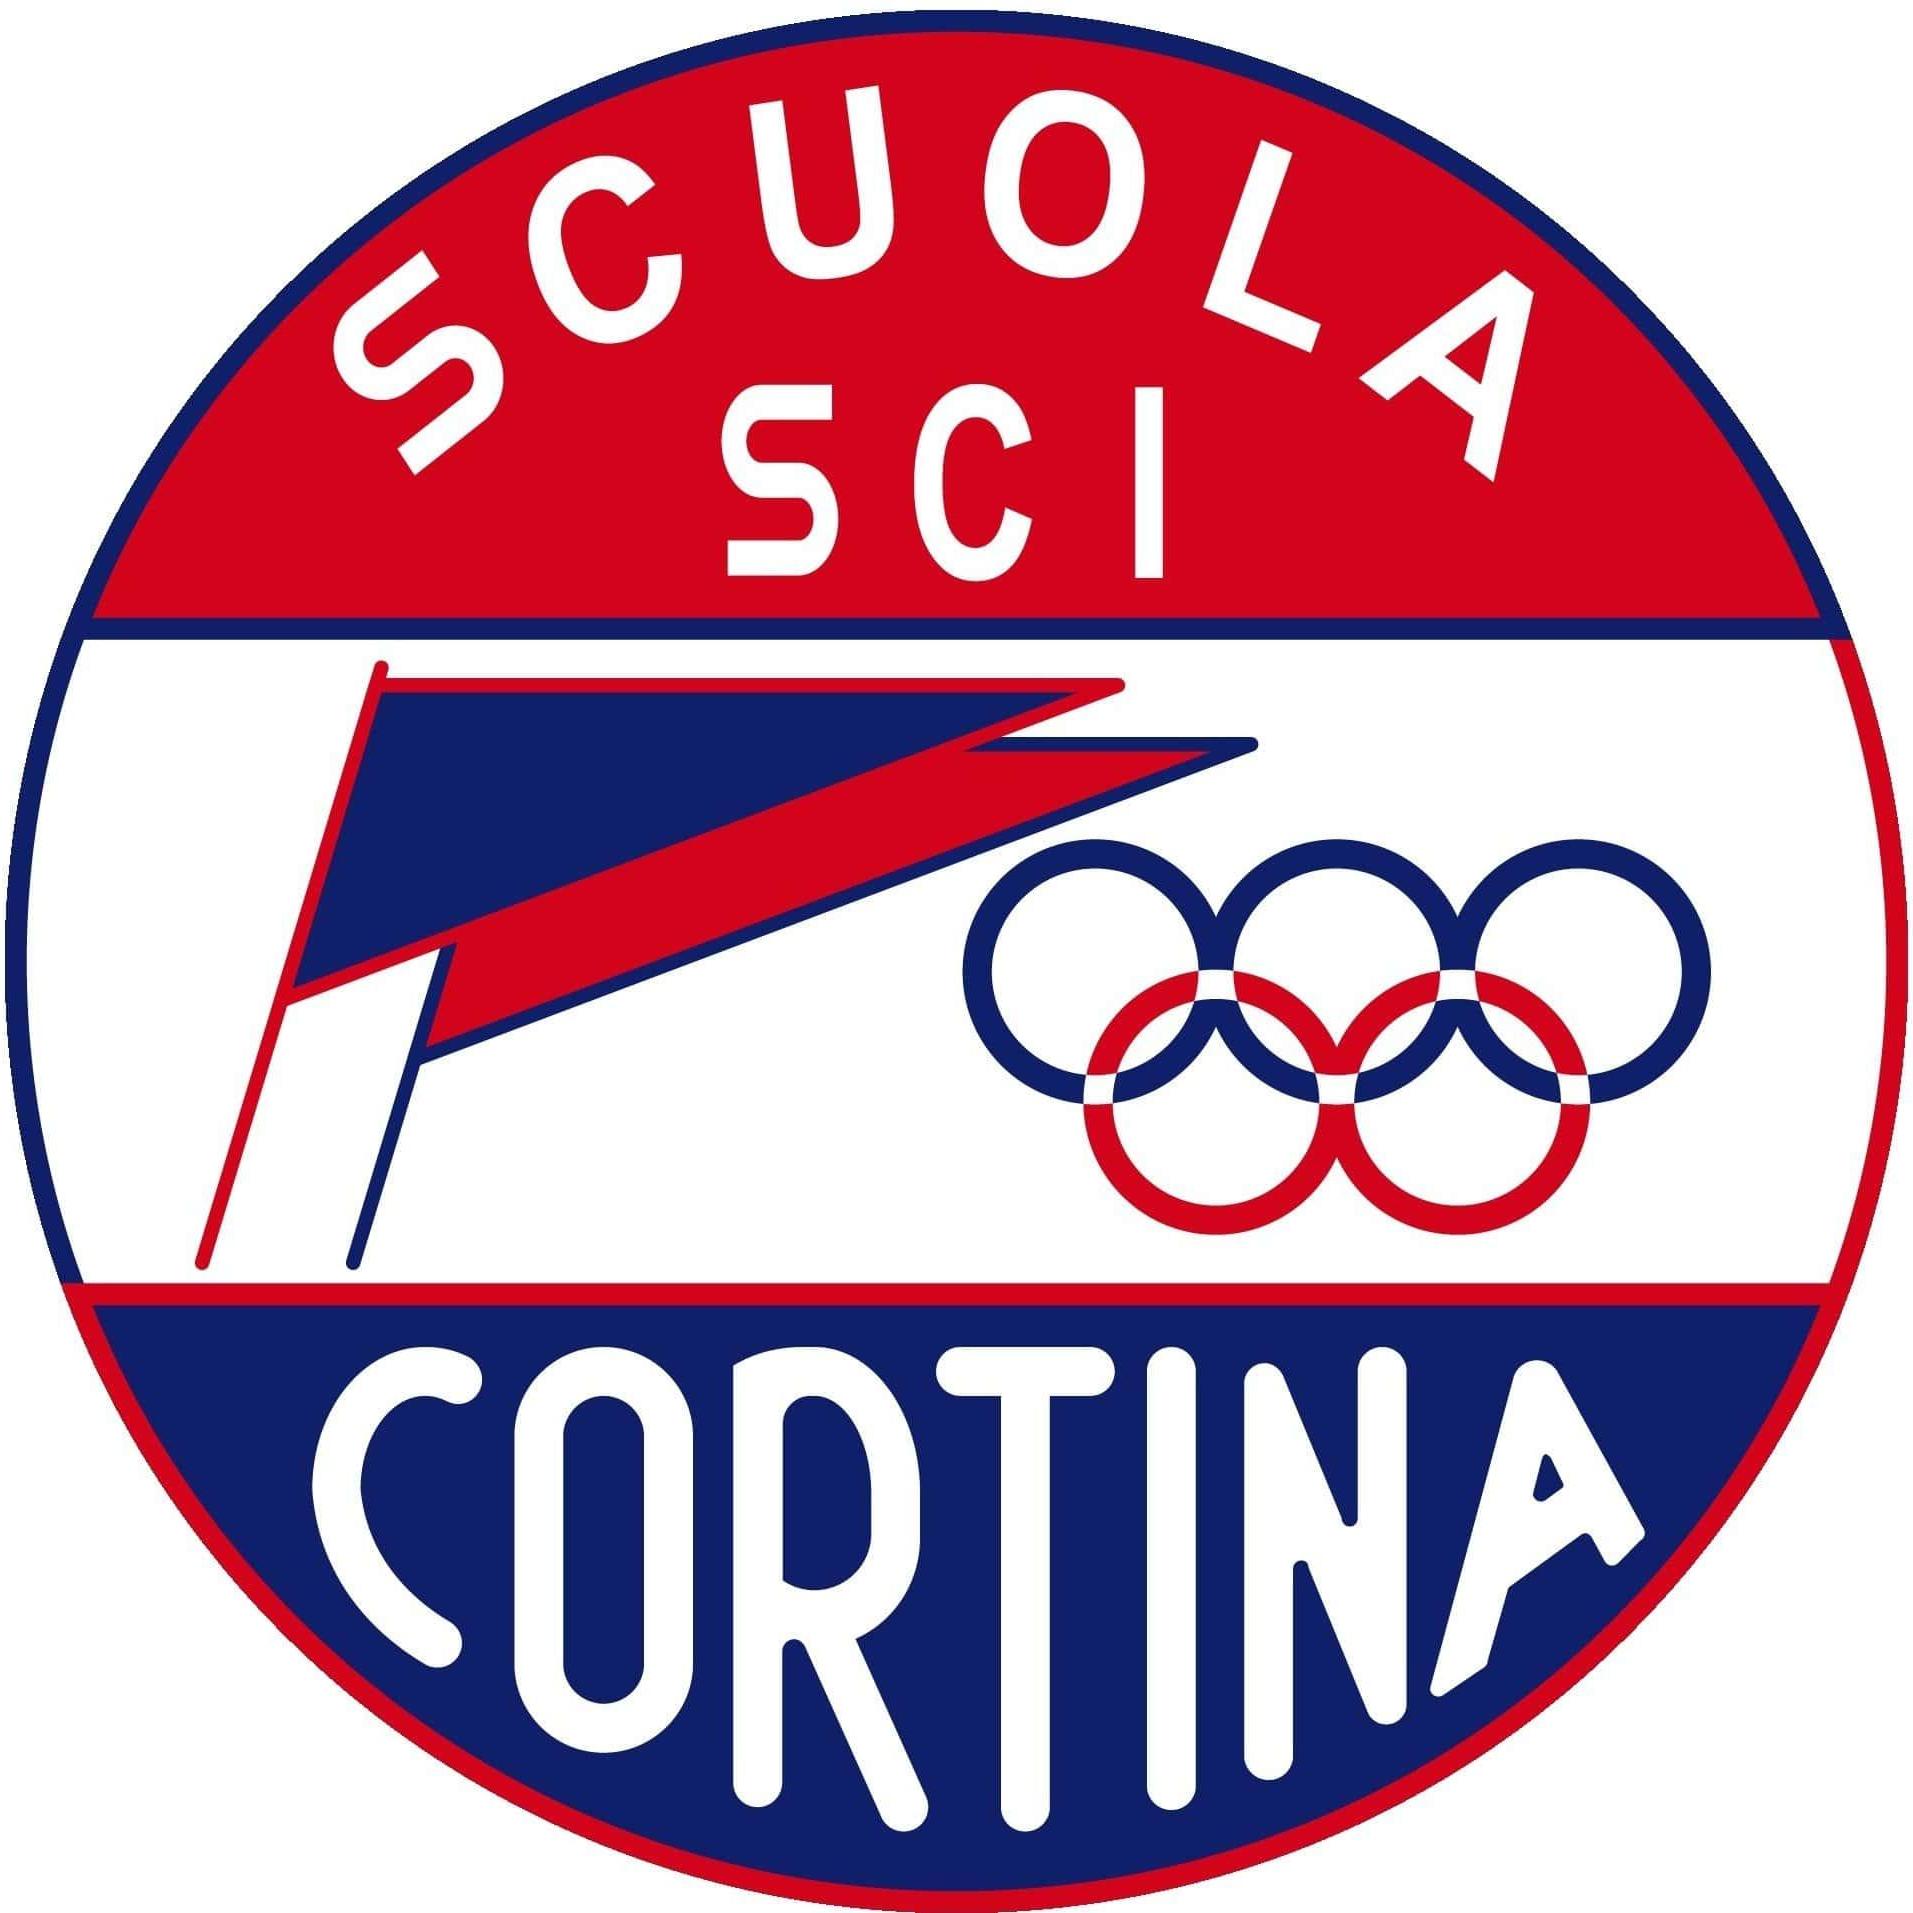 Adult Ski Lessons (from 15 y.) for First Timers from Scuola Sci Cortina